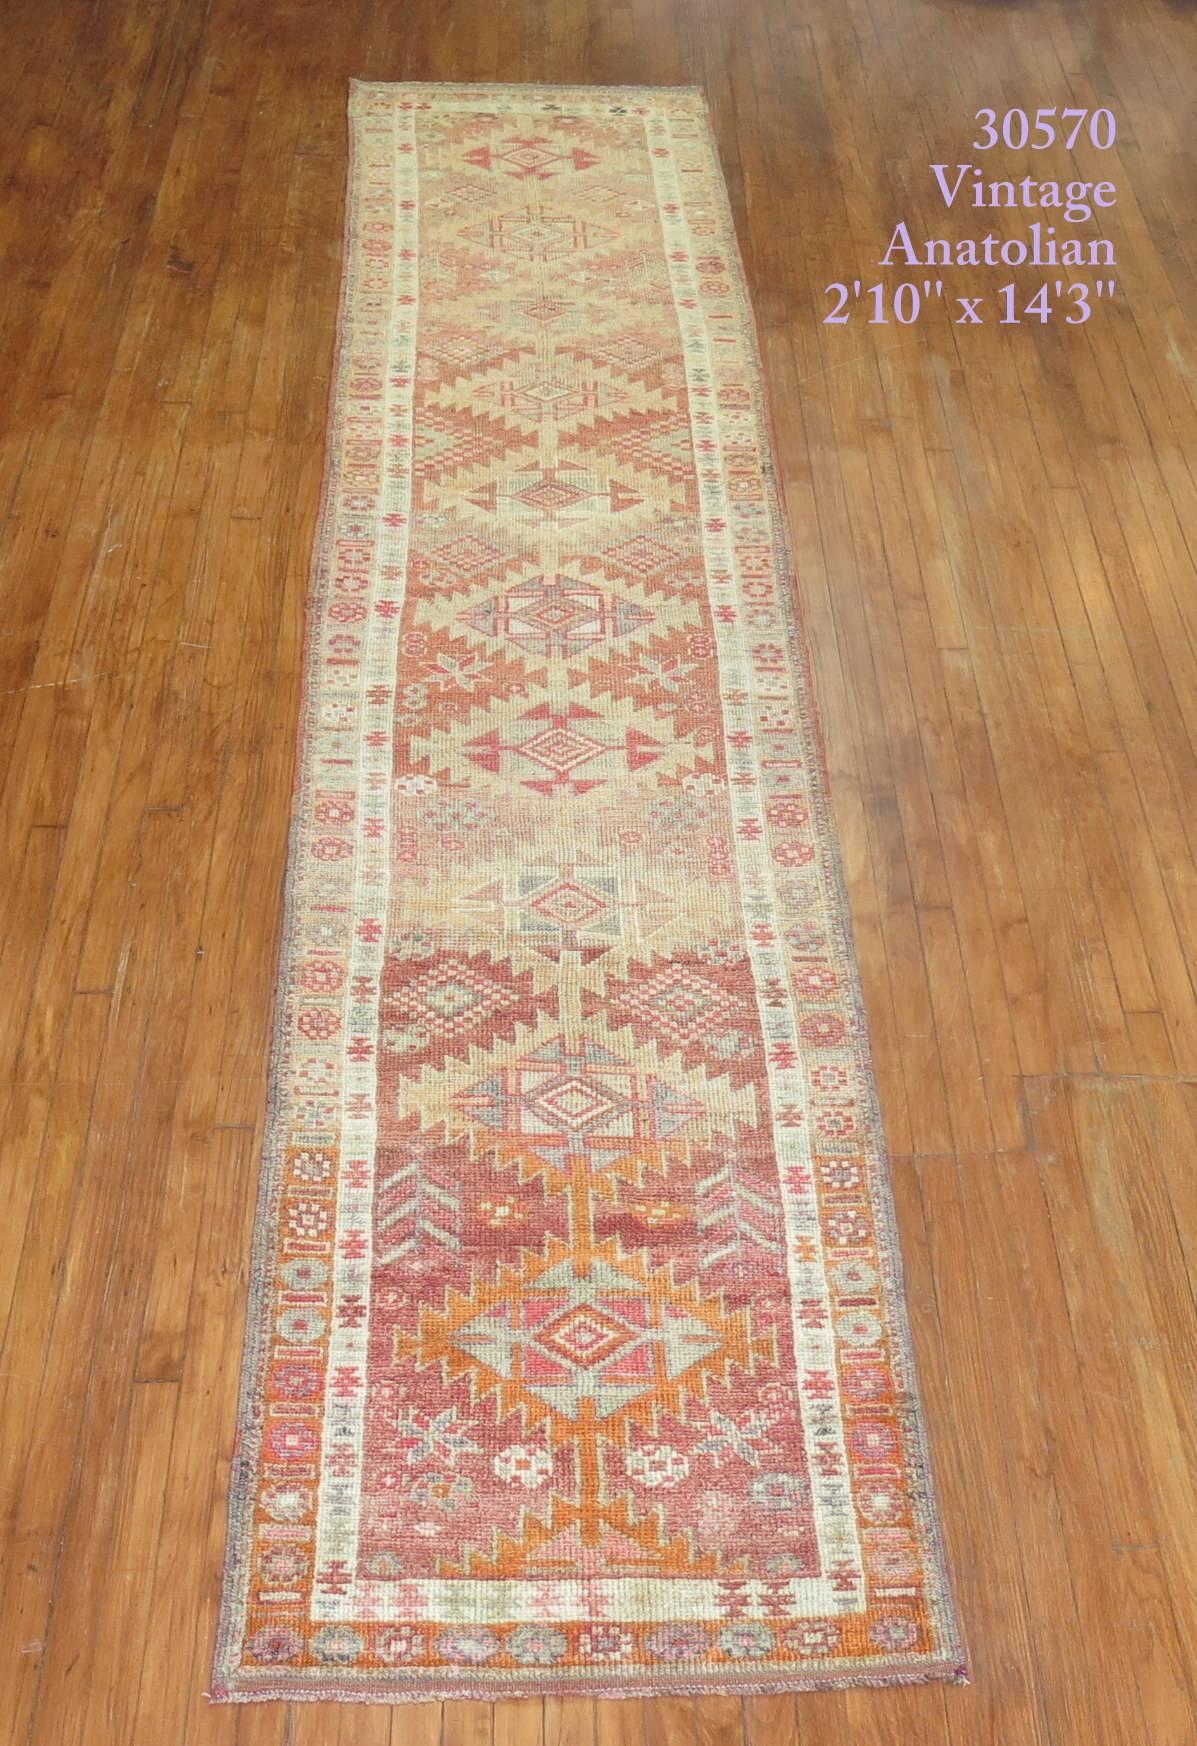 Lovely vintage Turkish Anaolian runner highlighted by pink and orange accents.